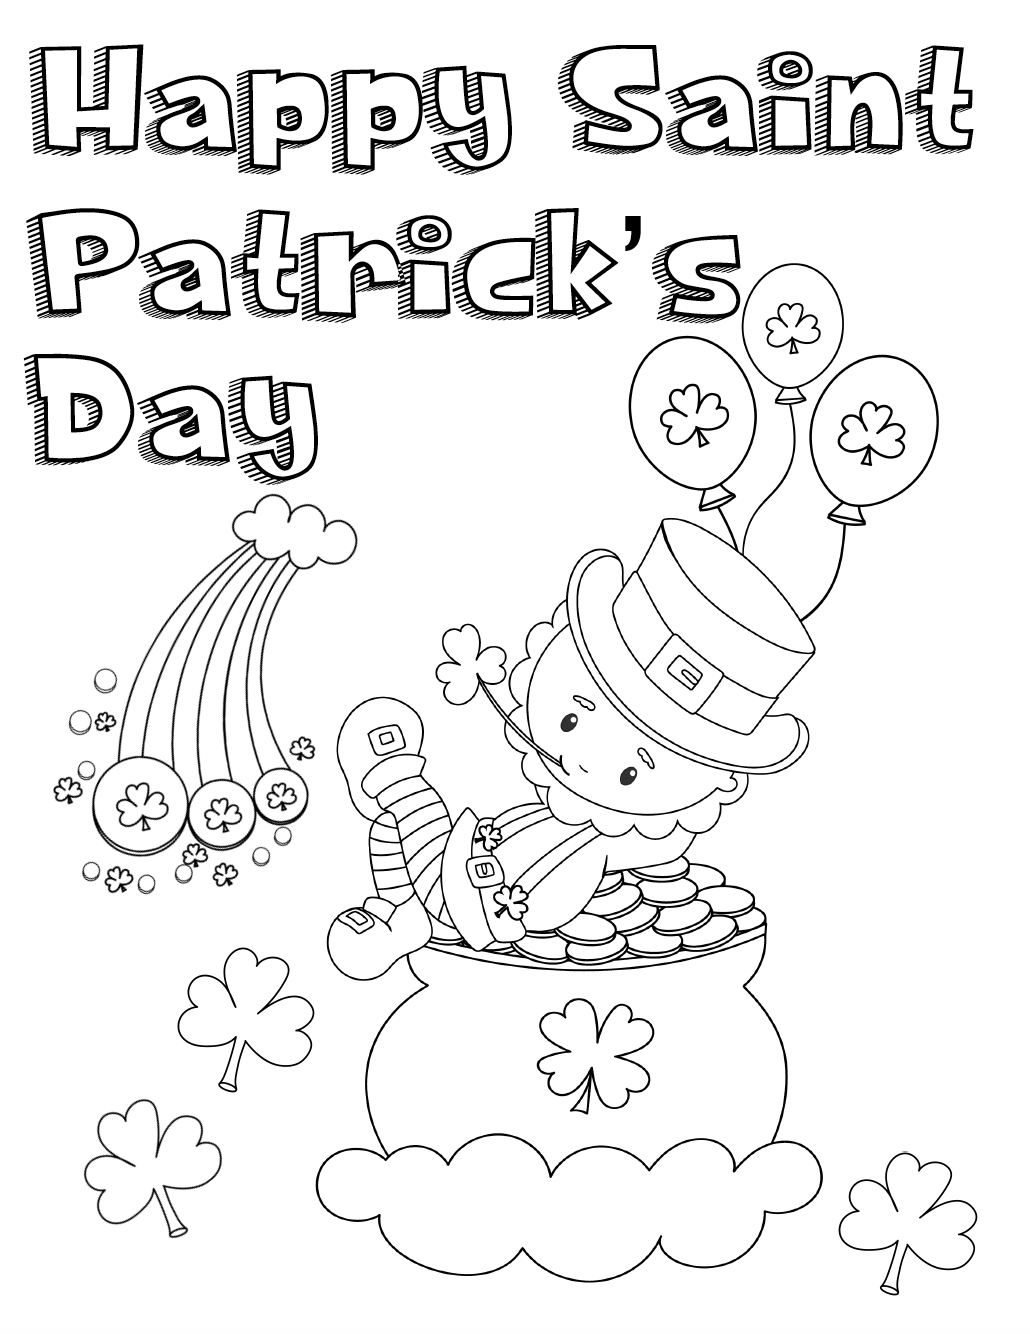 Free Printable St. Patrick&amp;#039;s Day Coloring Pages: 4 Designs! - Free Printable St Patrick Day Coloring Pages